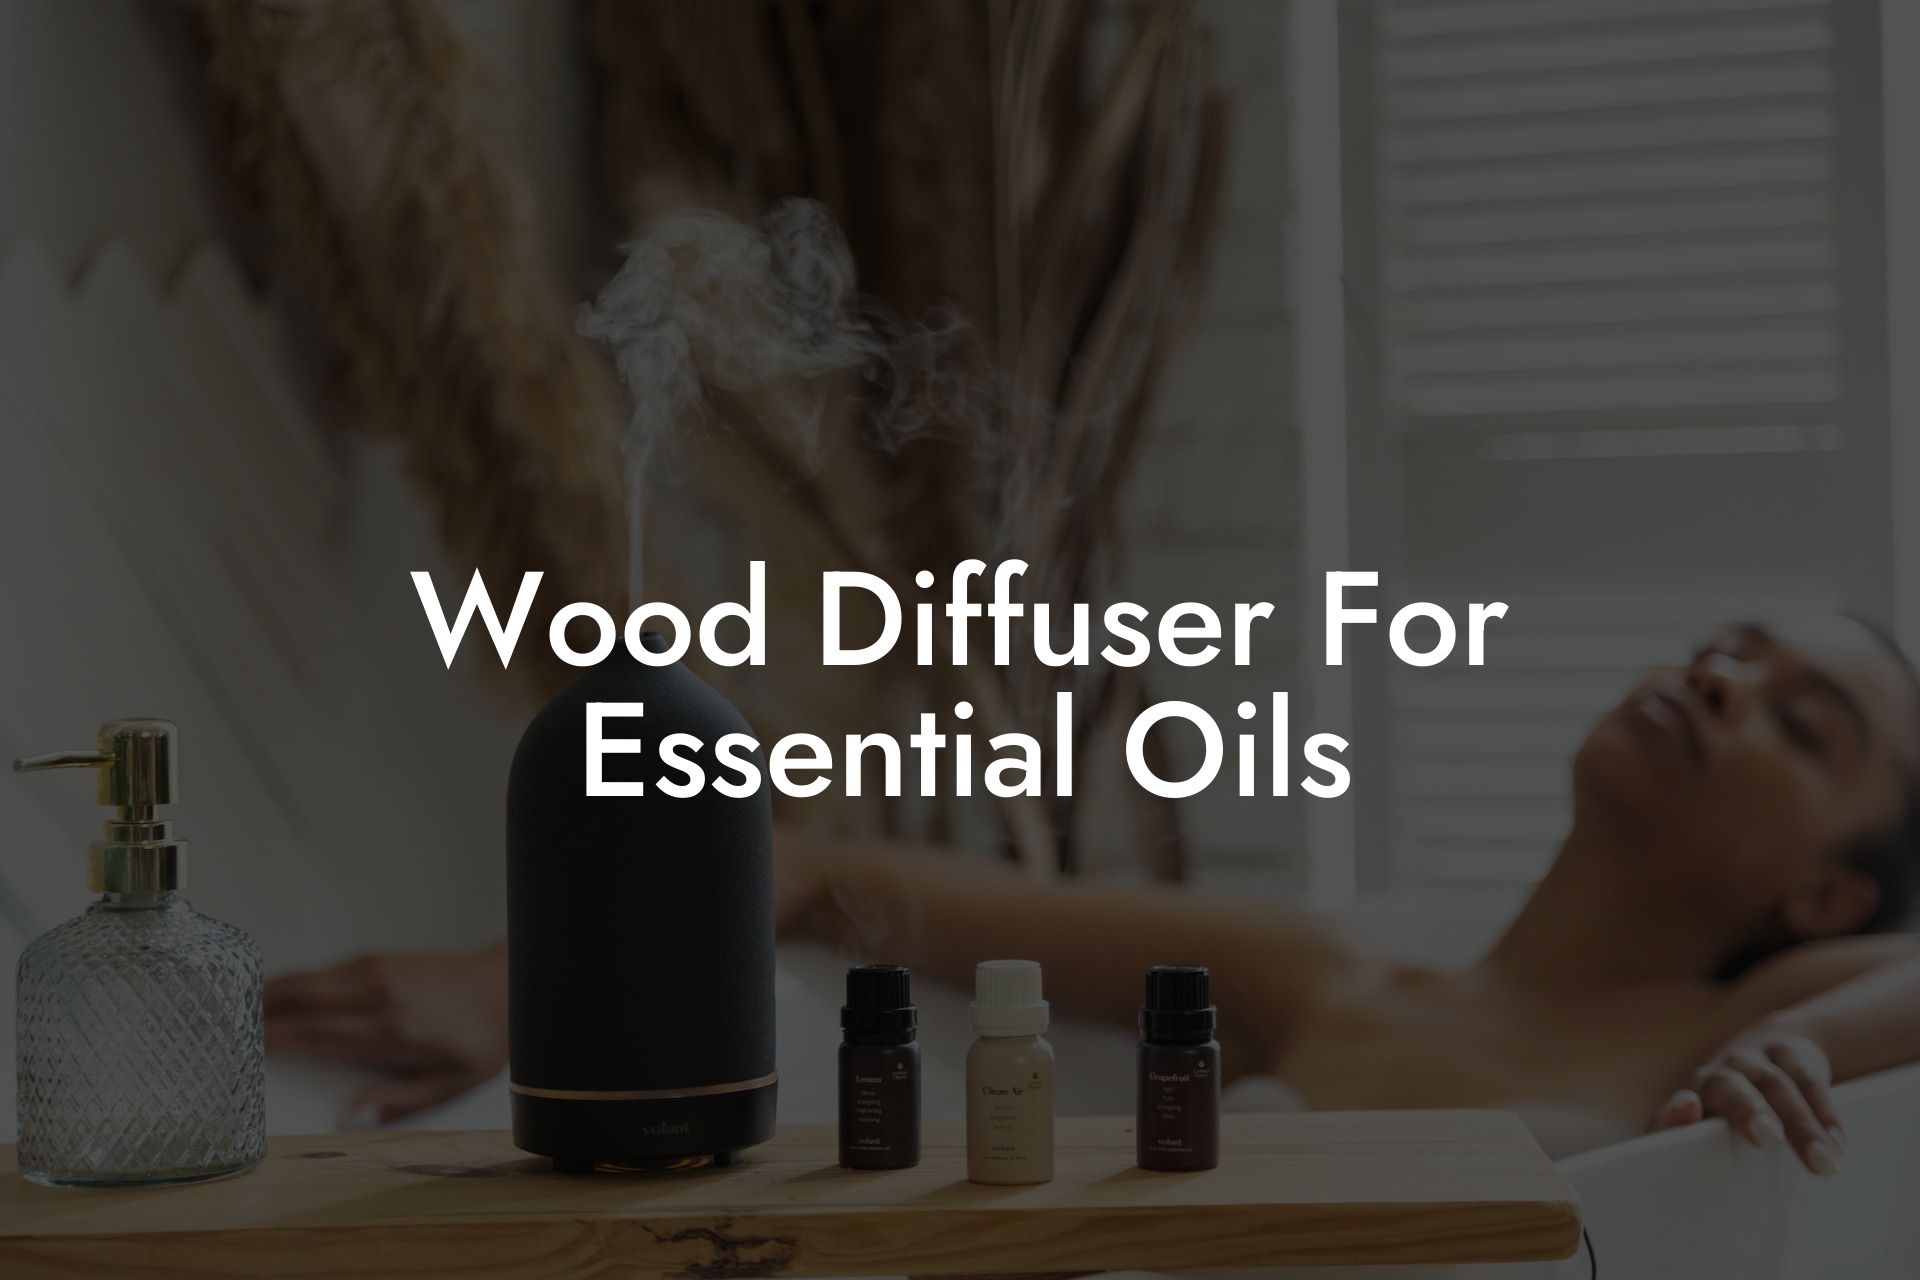 Wood Diffuser For Essential Oils